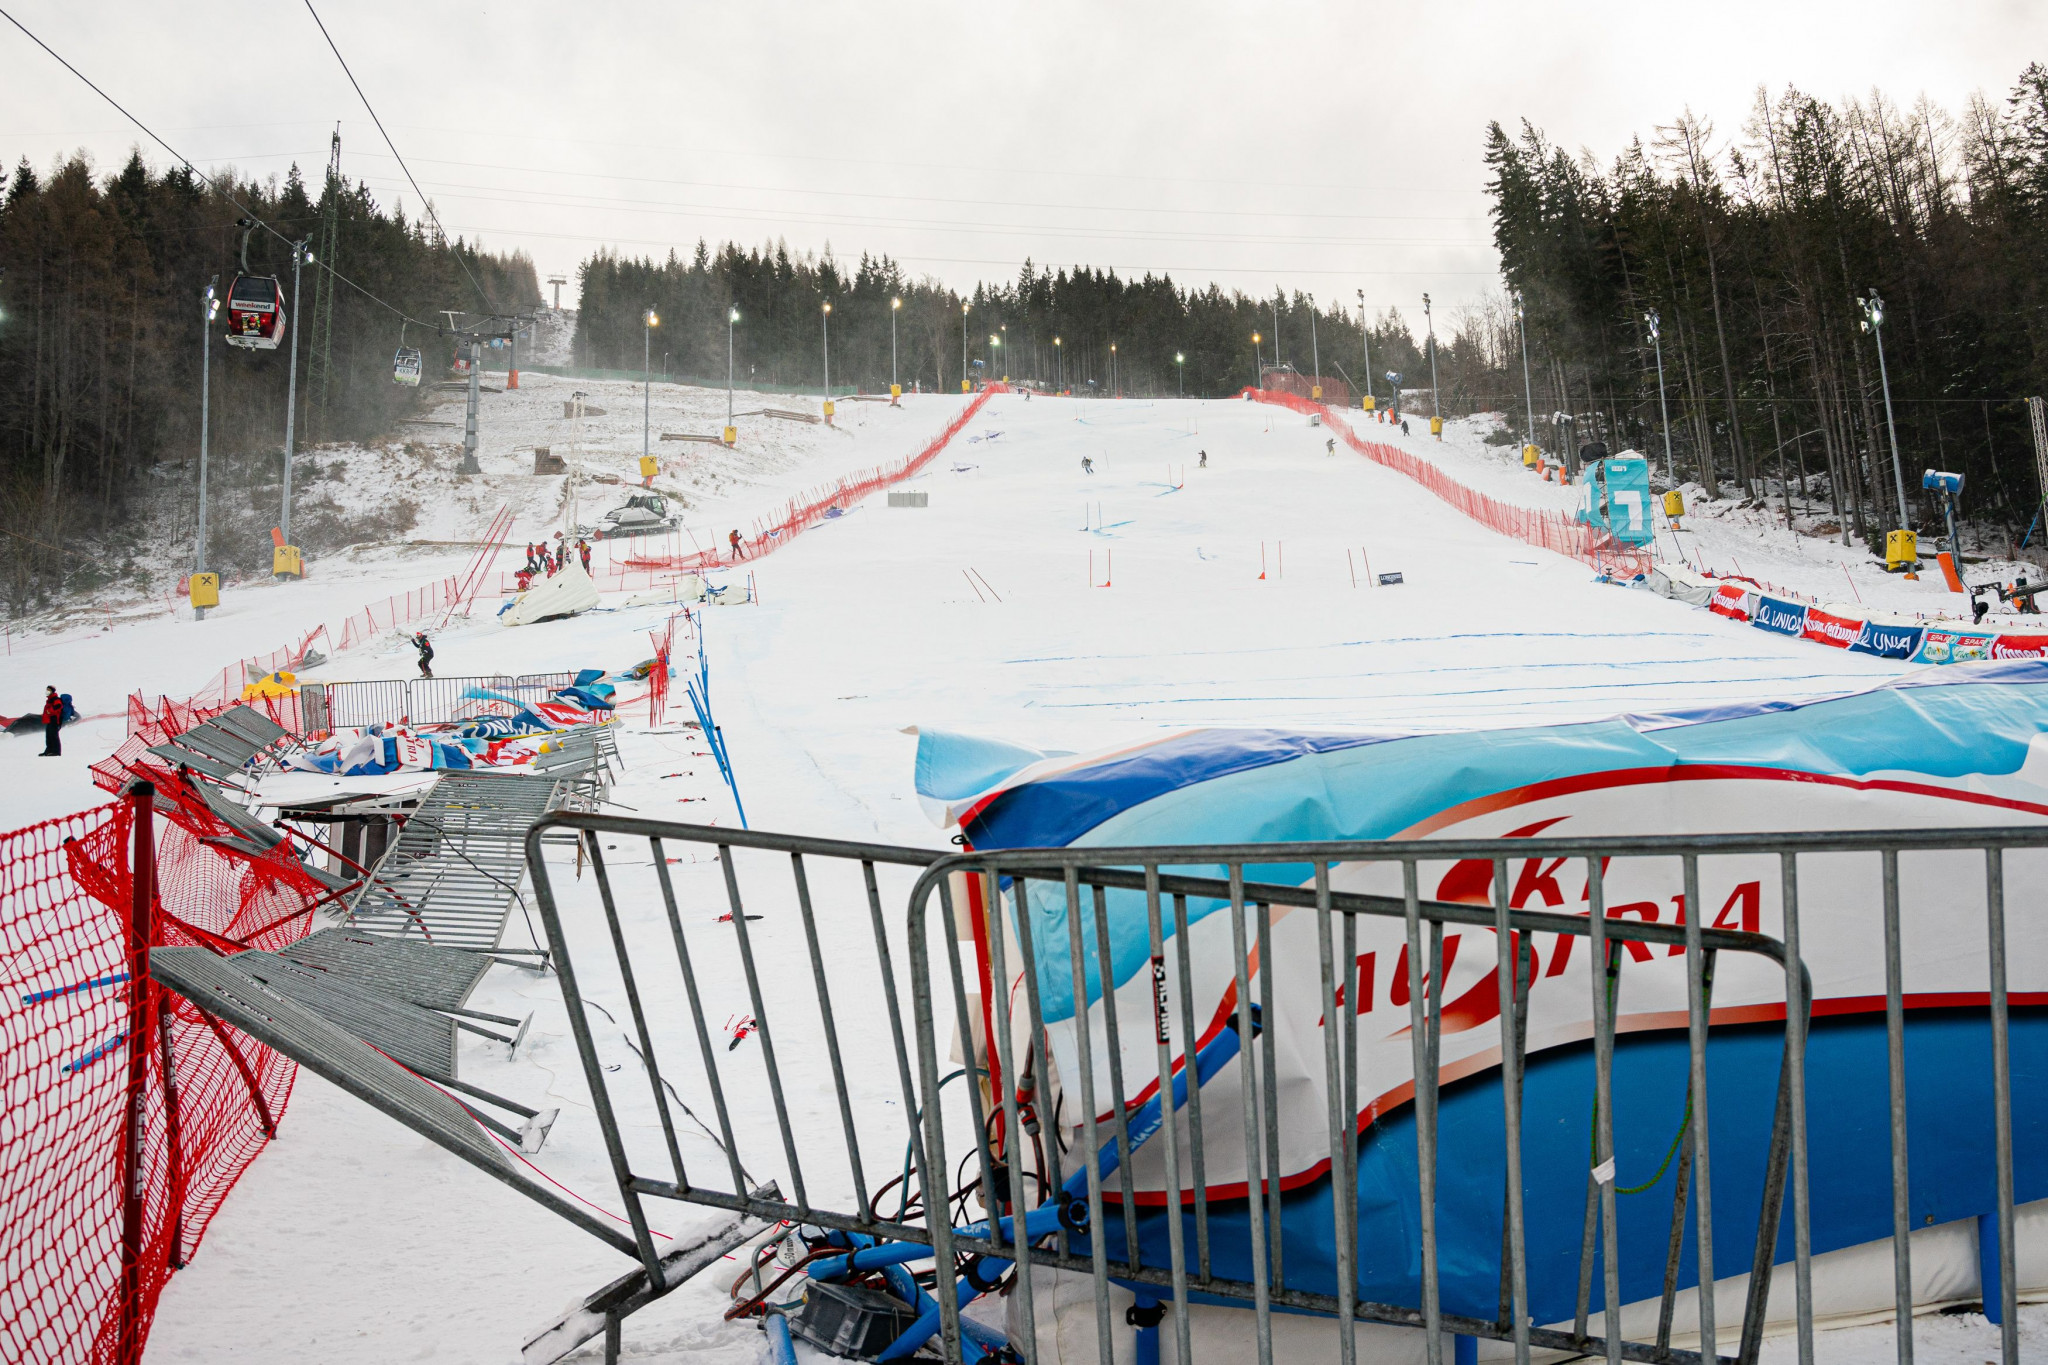 High winds in Semmering led to the cancellation of the giant slalom race ©Getty Images